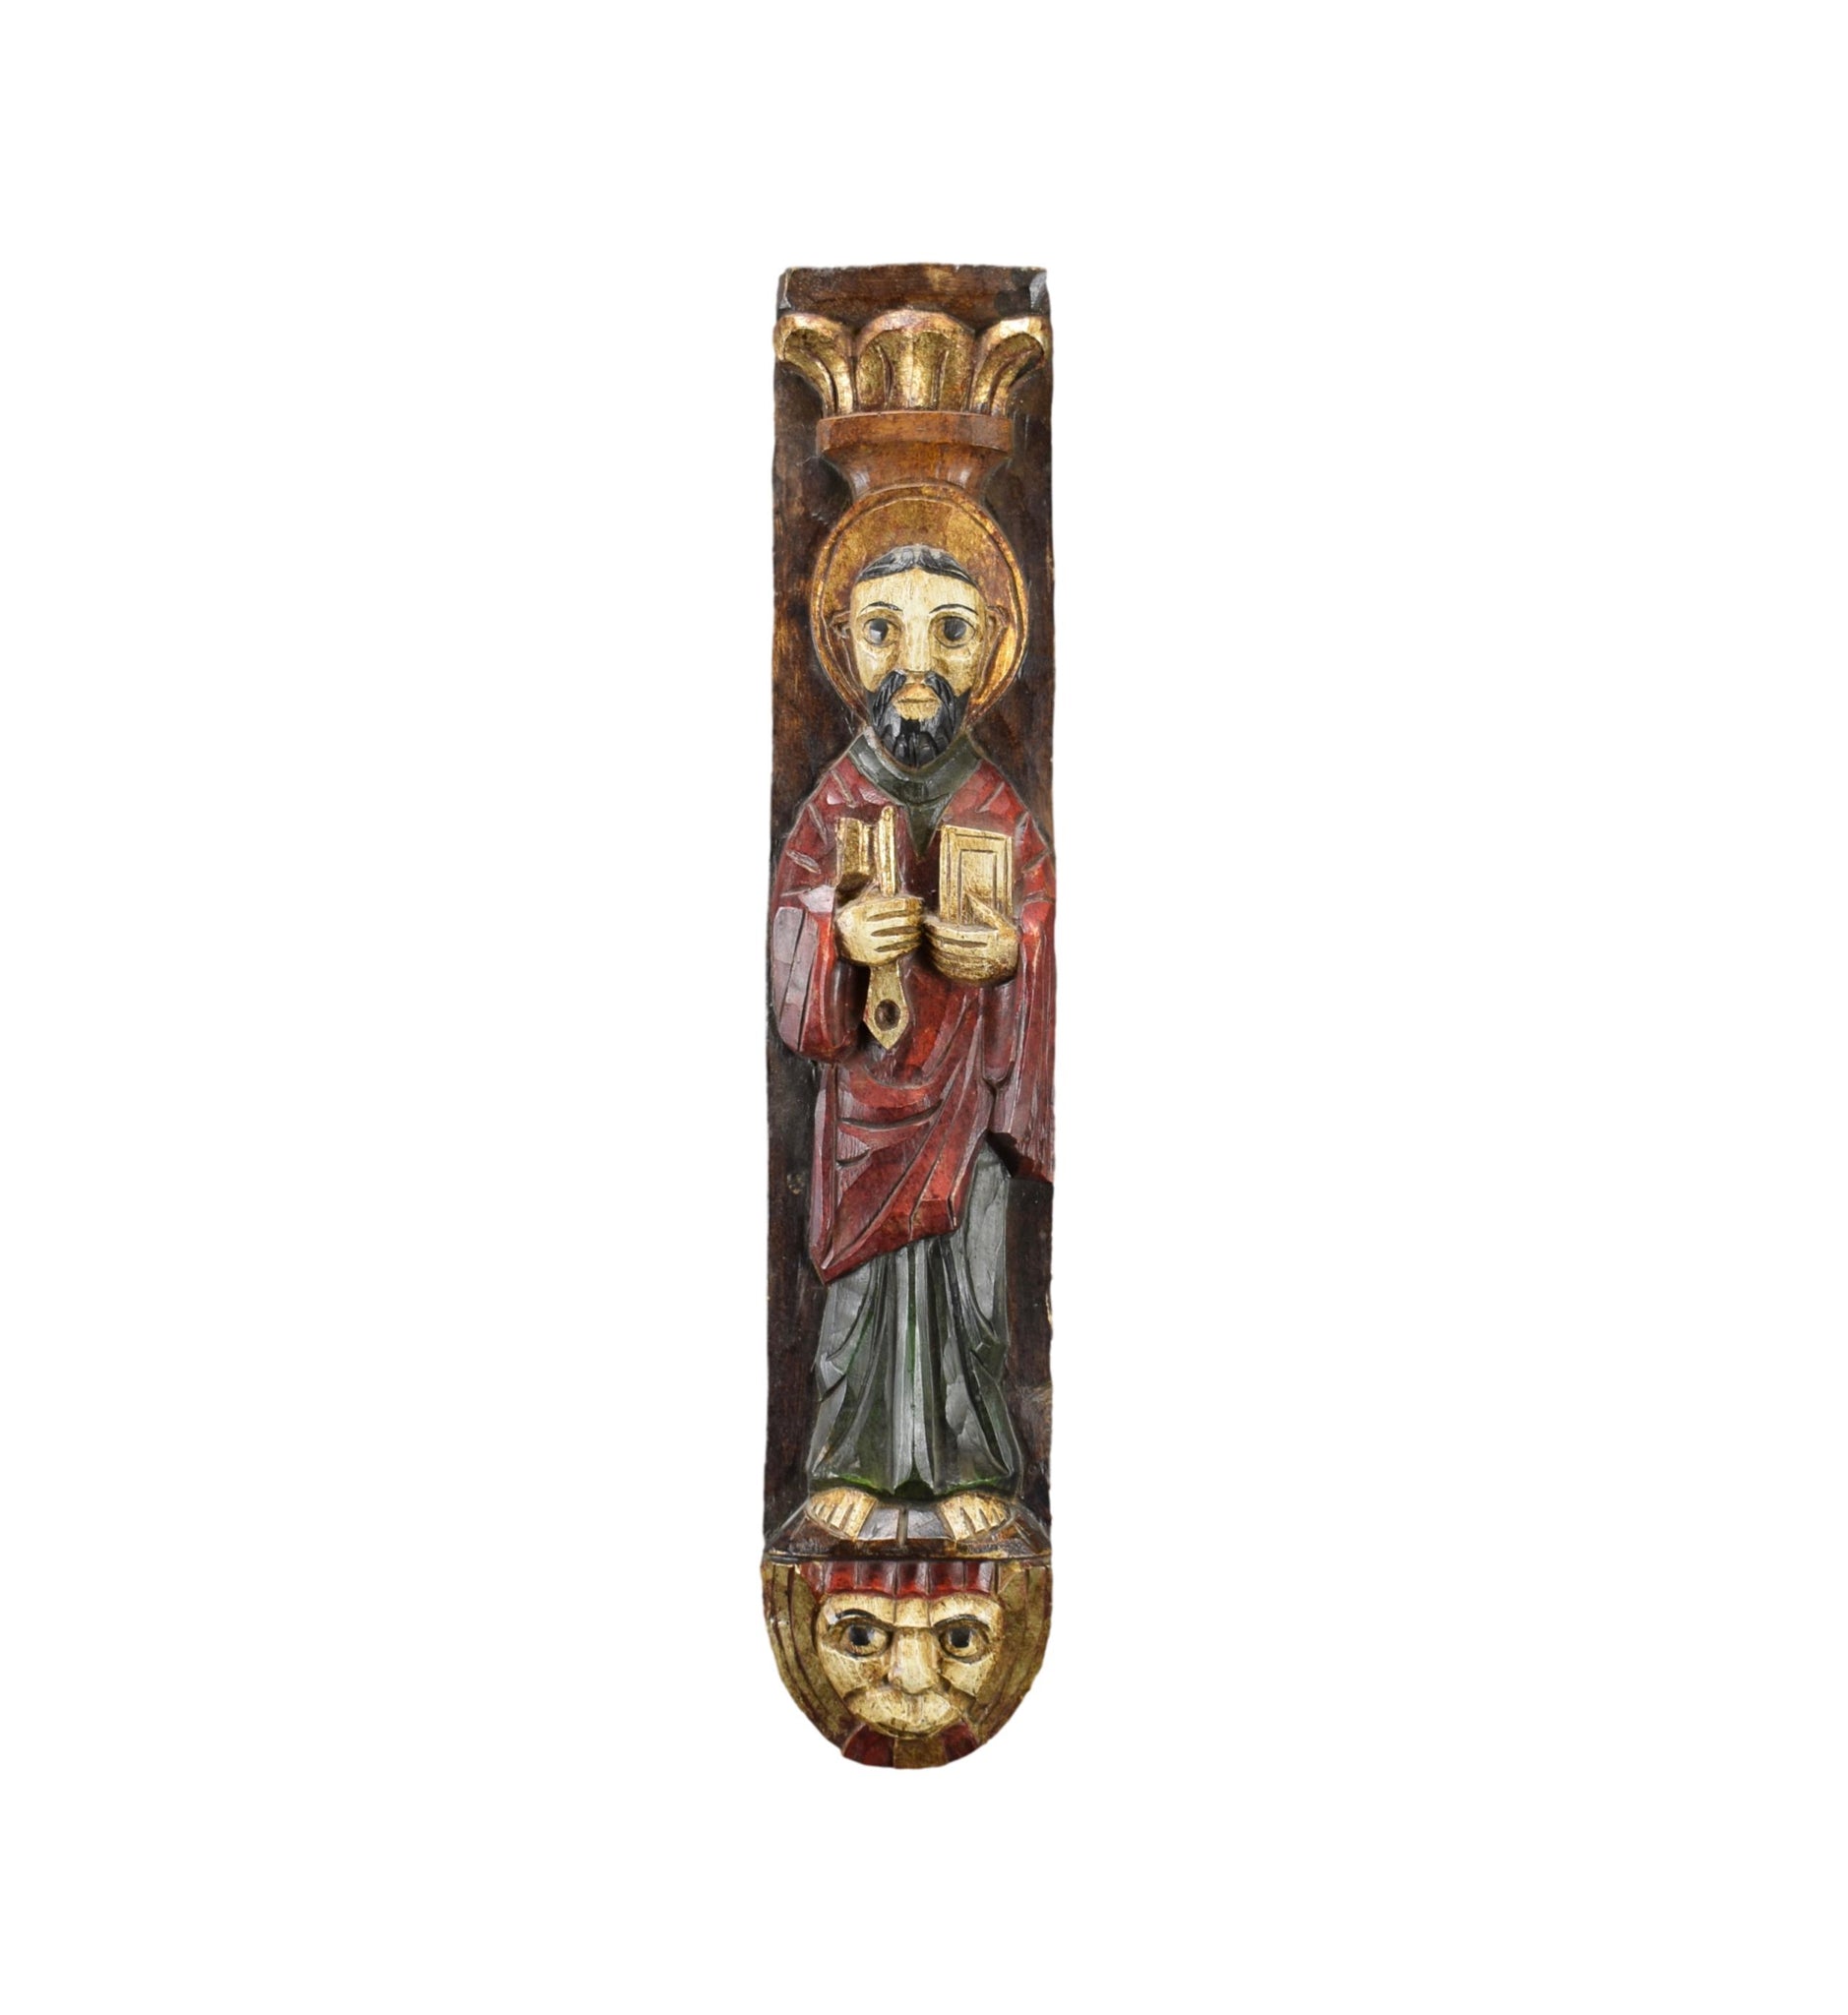 Saint Apostle Peter Carved Painted Wood Wall Statue Sculpture